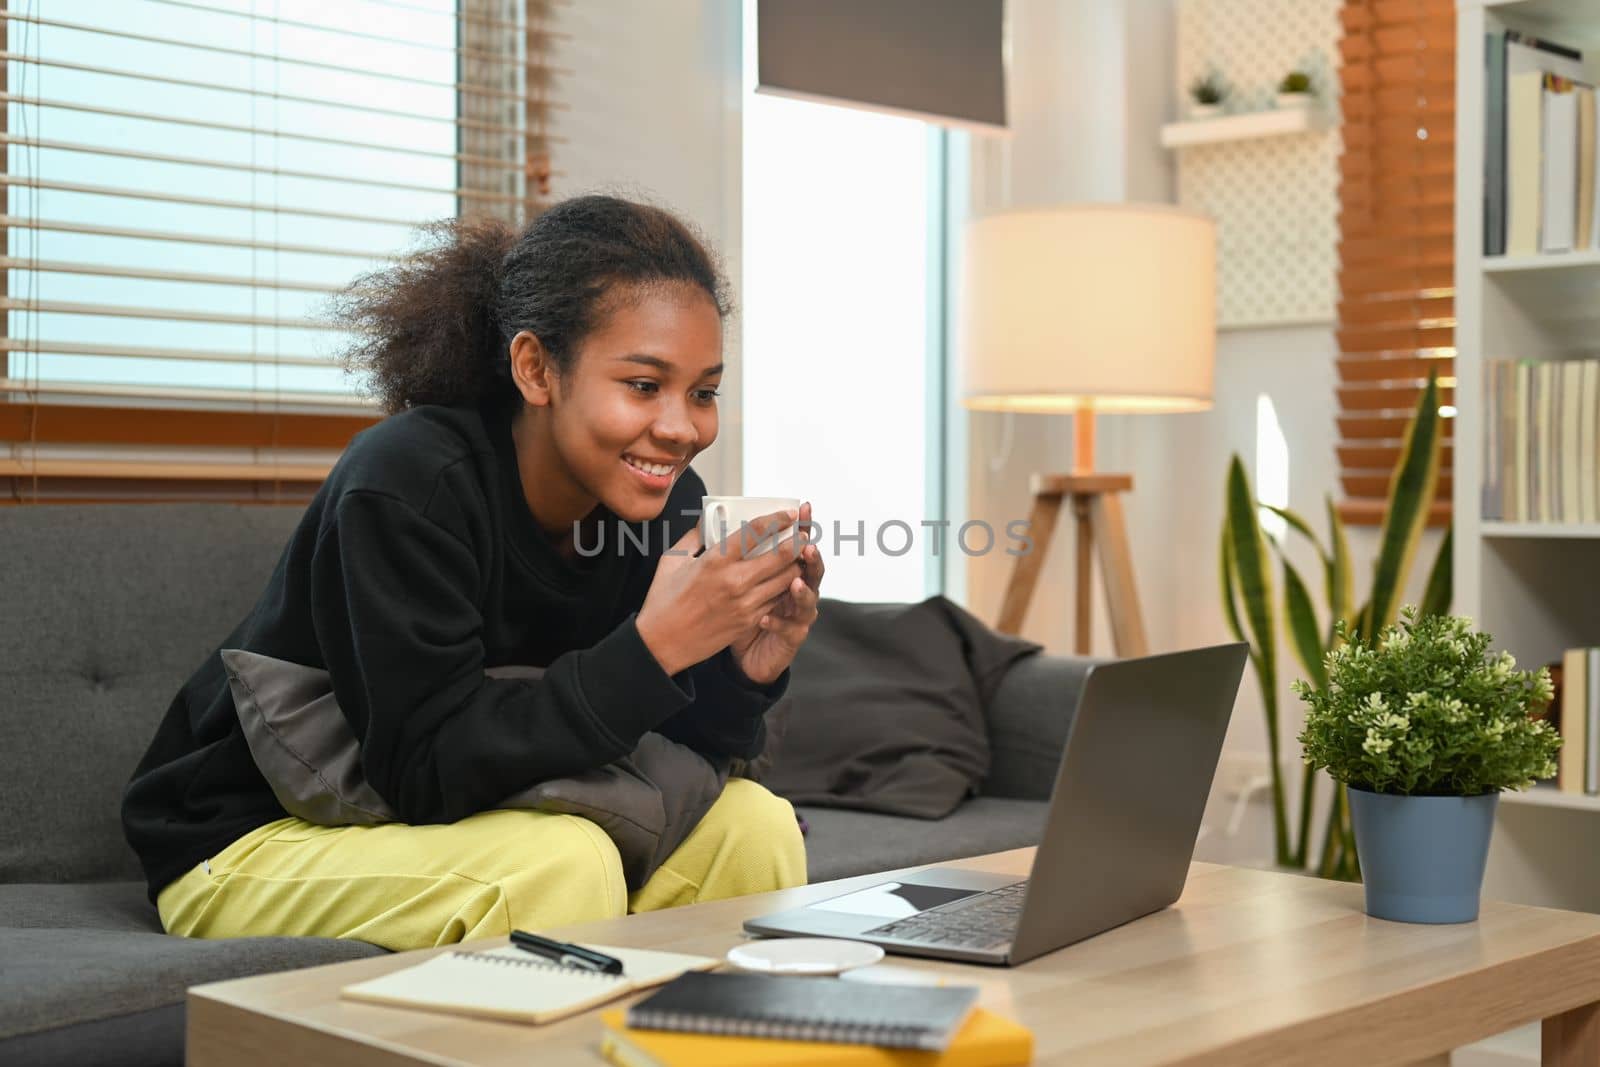 Smiling teenage woman enjoy browsing internet on laptop, while relaxing in comfortable living room.